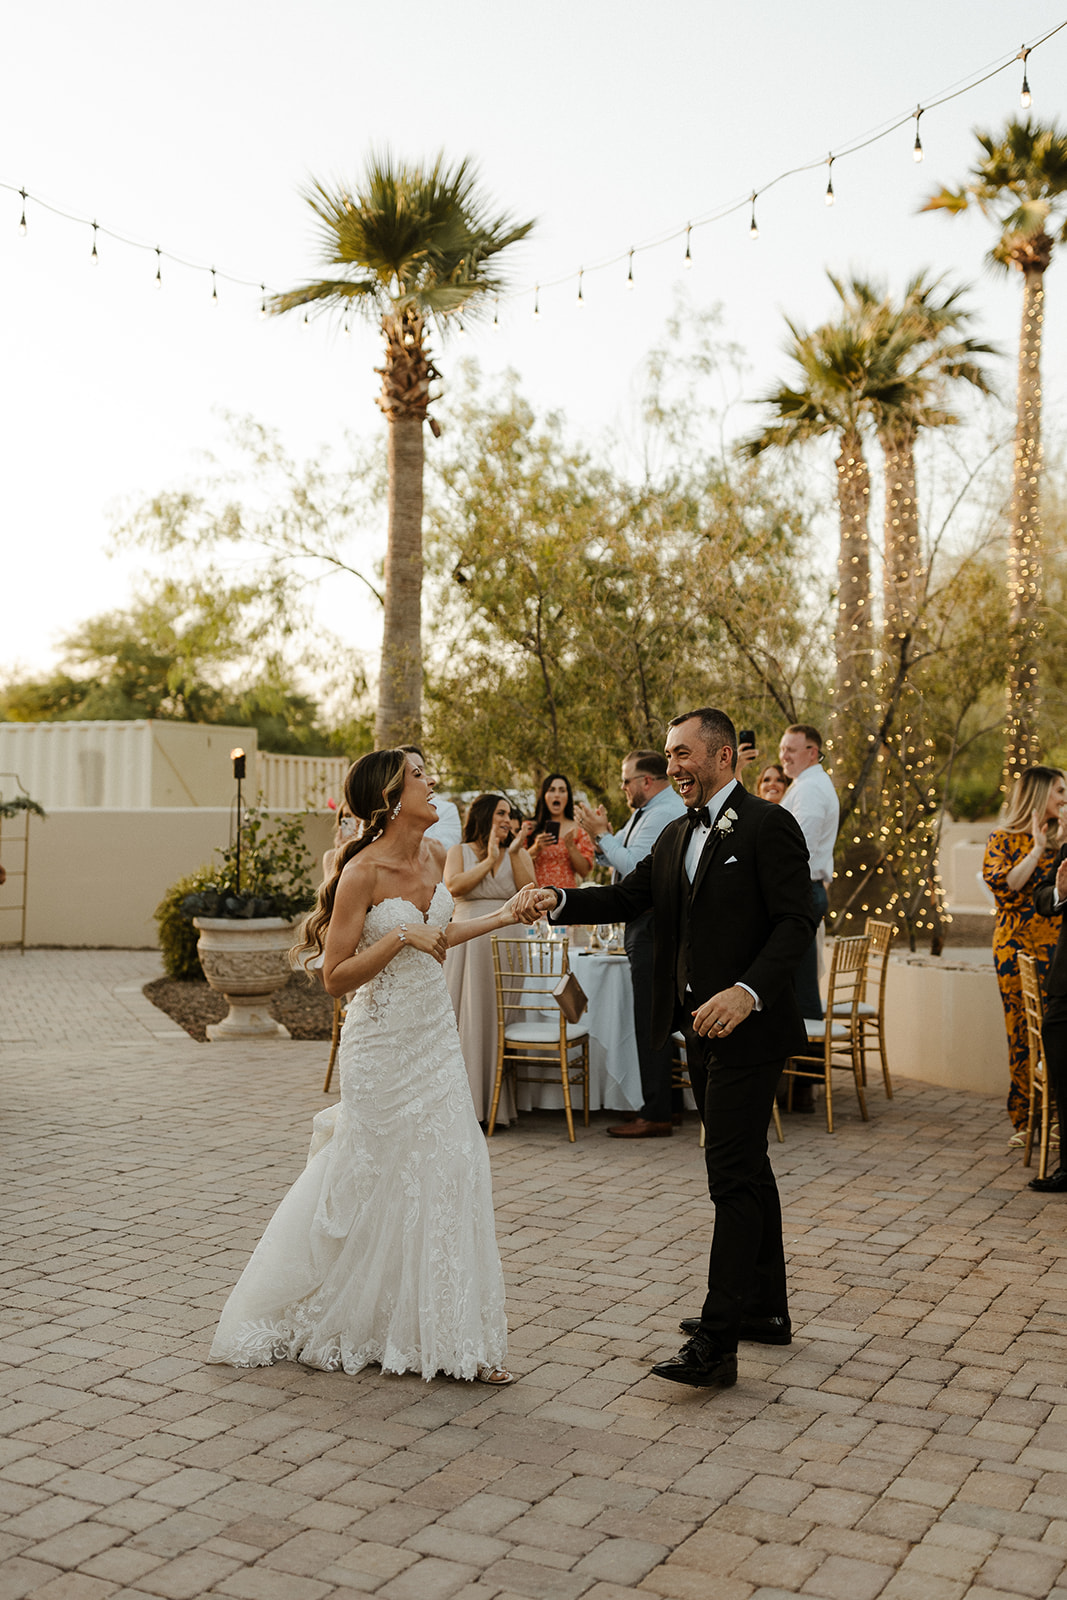 Bride and groom dance together during their Arizona wedding at The Secret Garden Event Center